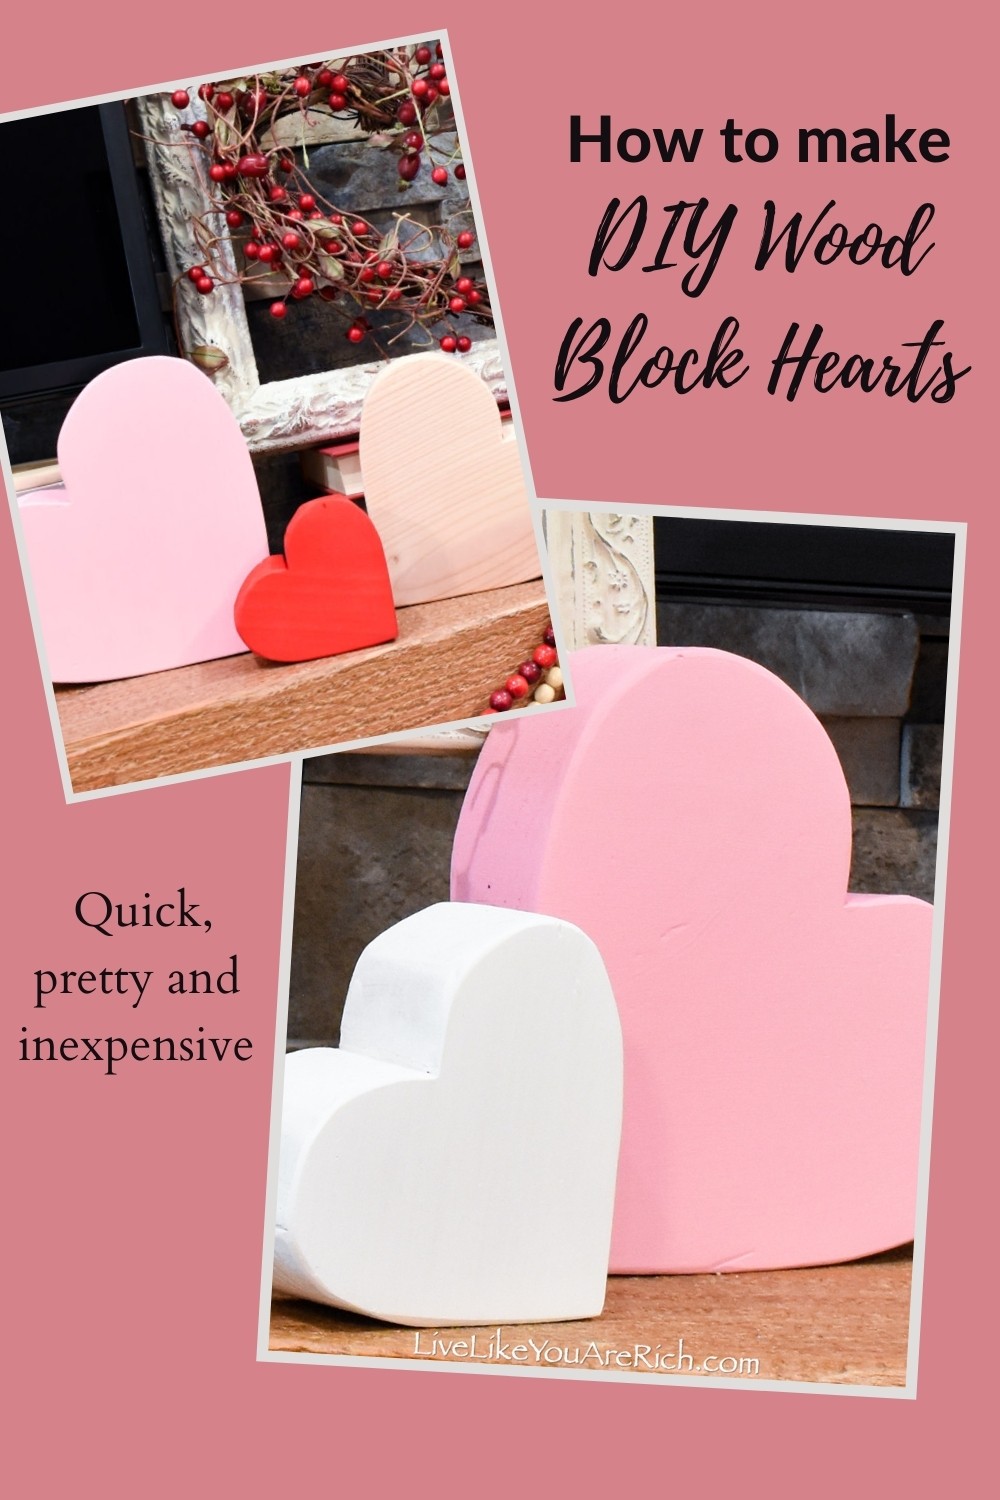 These DIY Wood Block Hearts make great Valentine’s Day decorations. They were inexpensive and only cost about $5.00 for all six (we did have all the tools needed for the project so that kept costs down). They were pretty quick to make as well. 